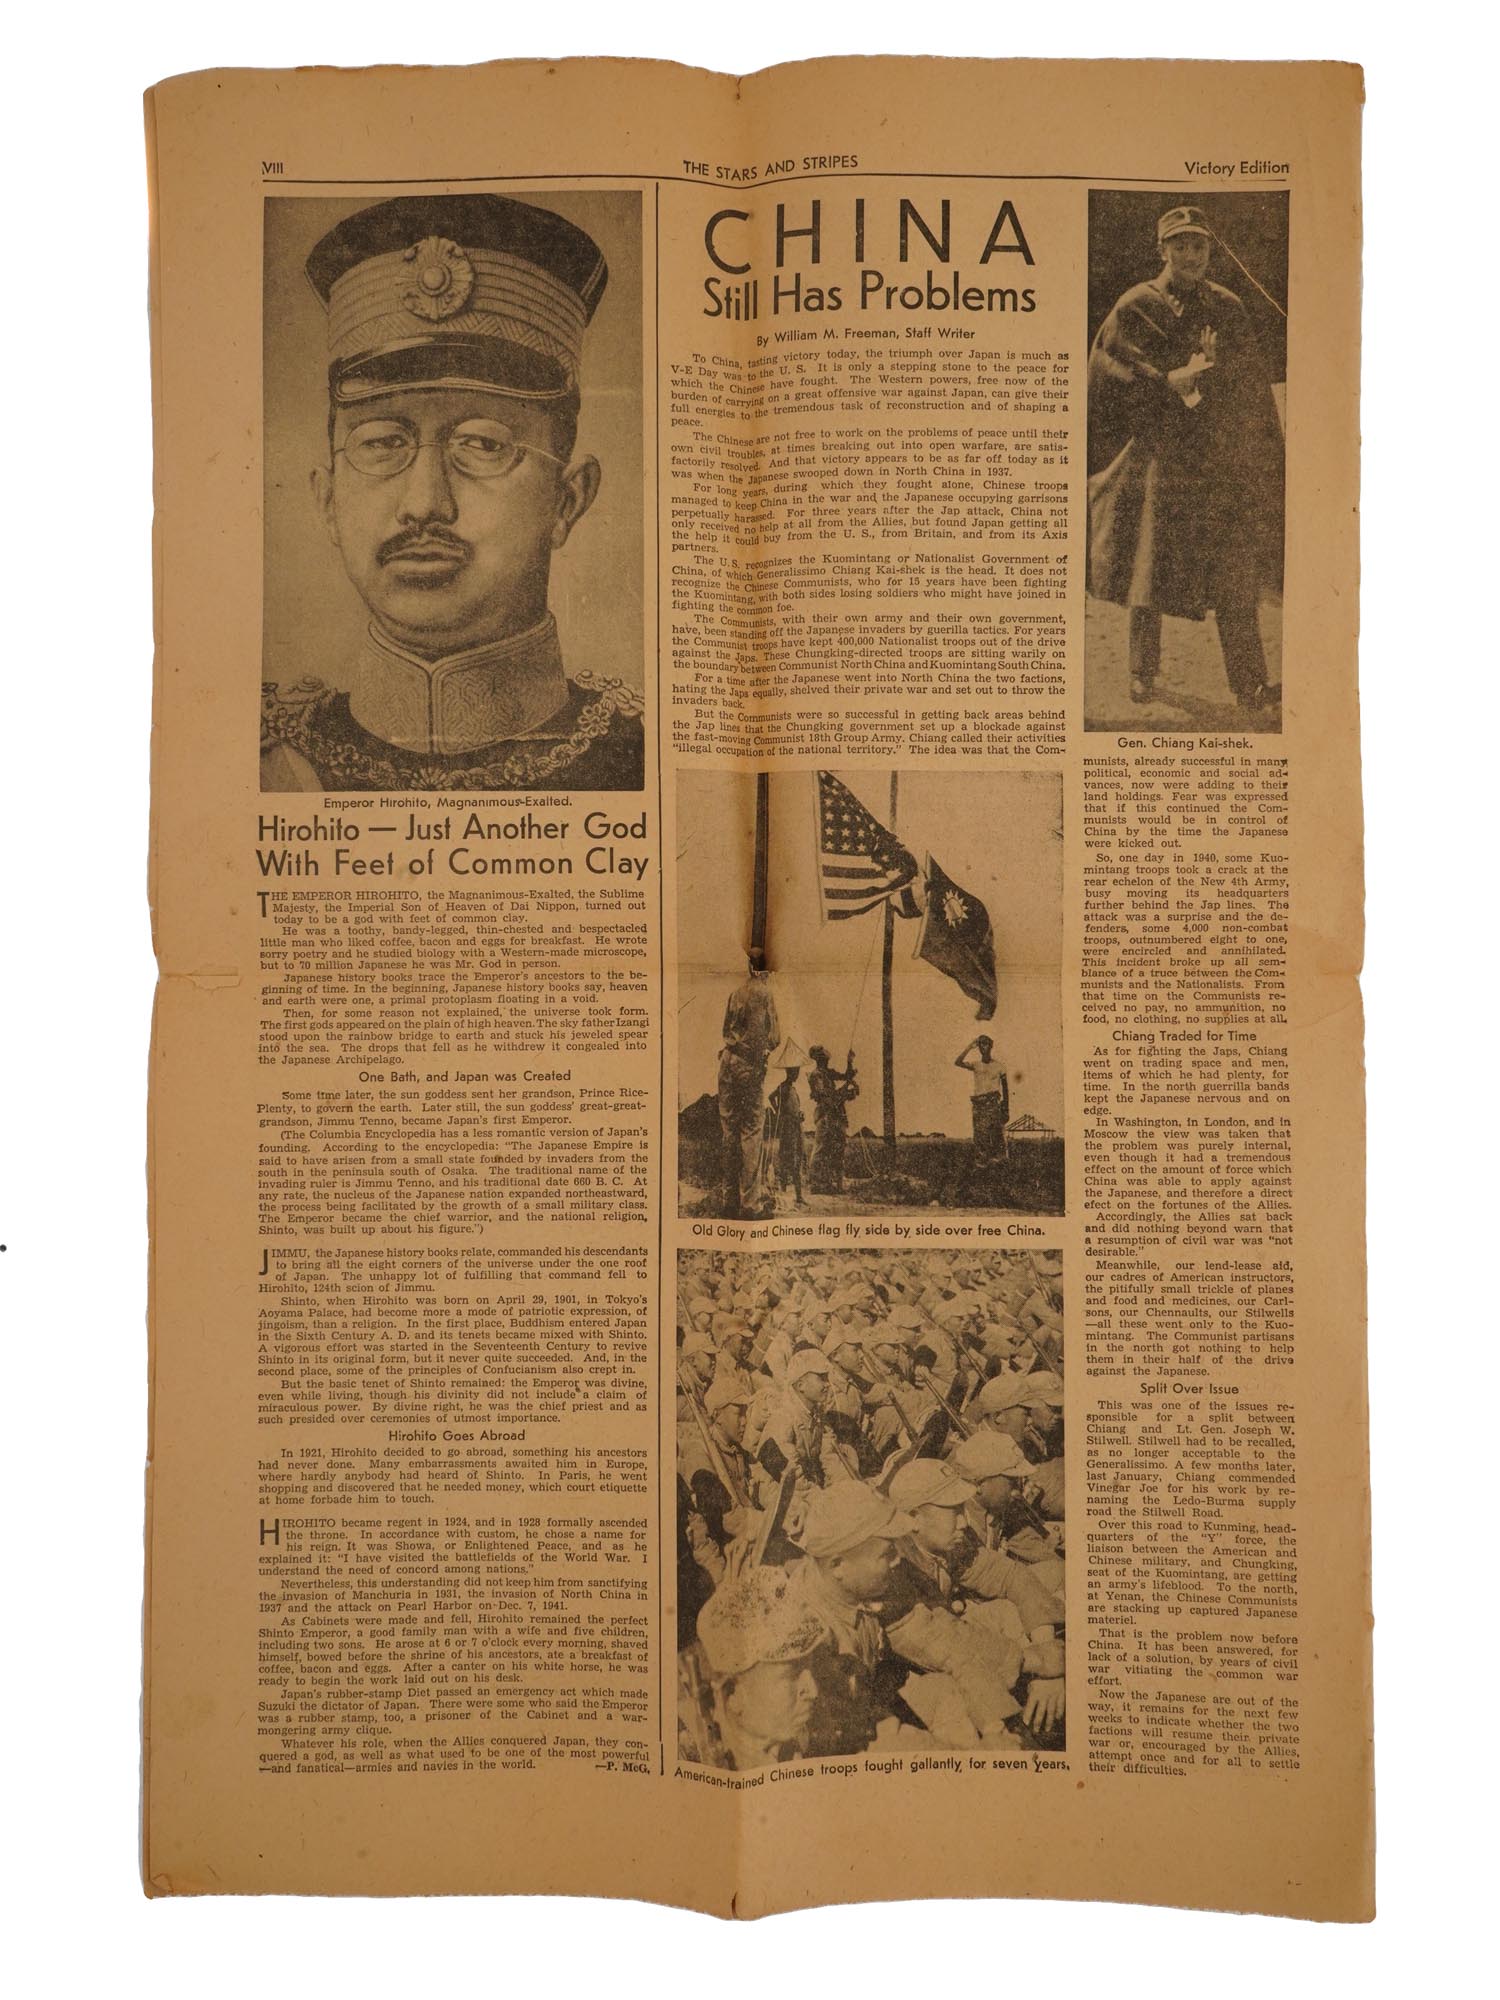 1945 US VICTORY EDITION STARS AND STRIPES NEWSPAPER PIC-0